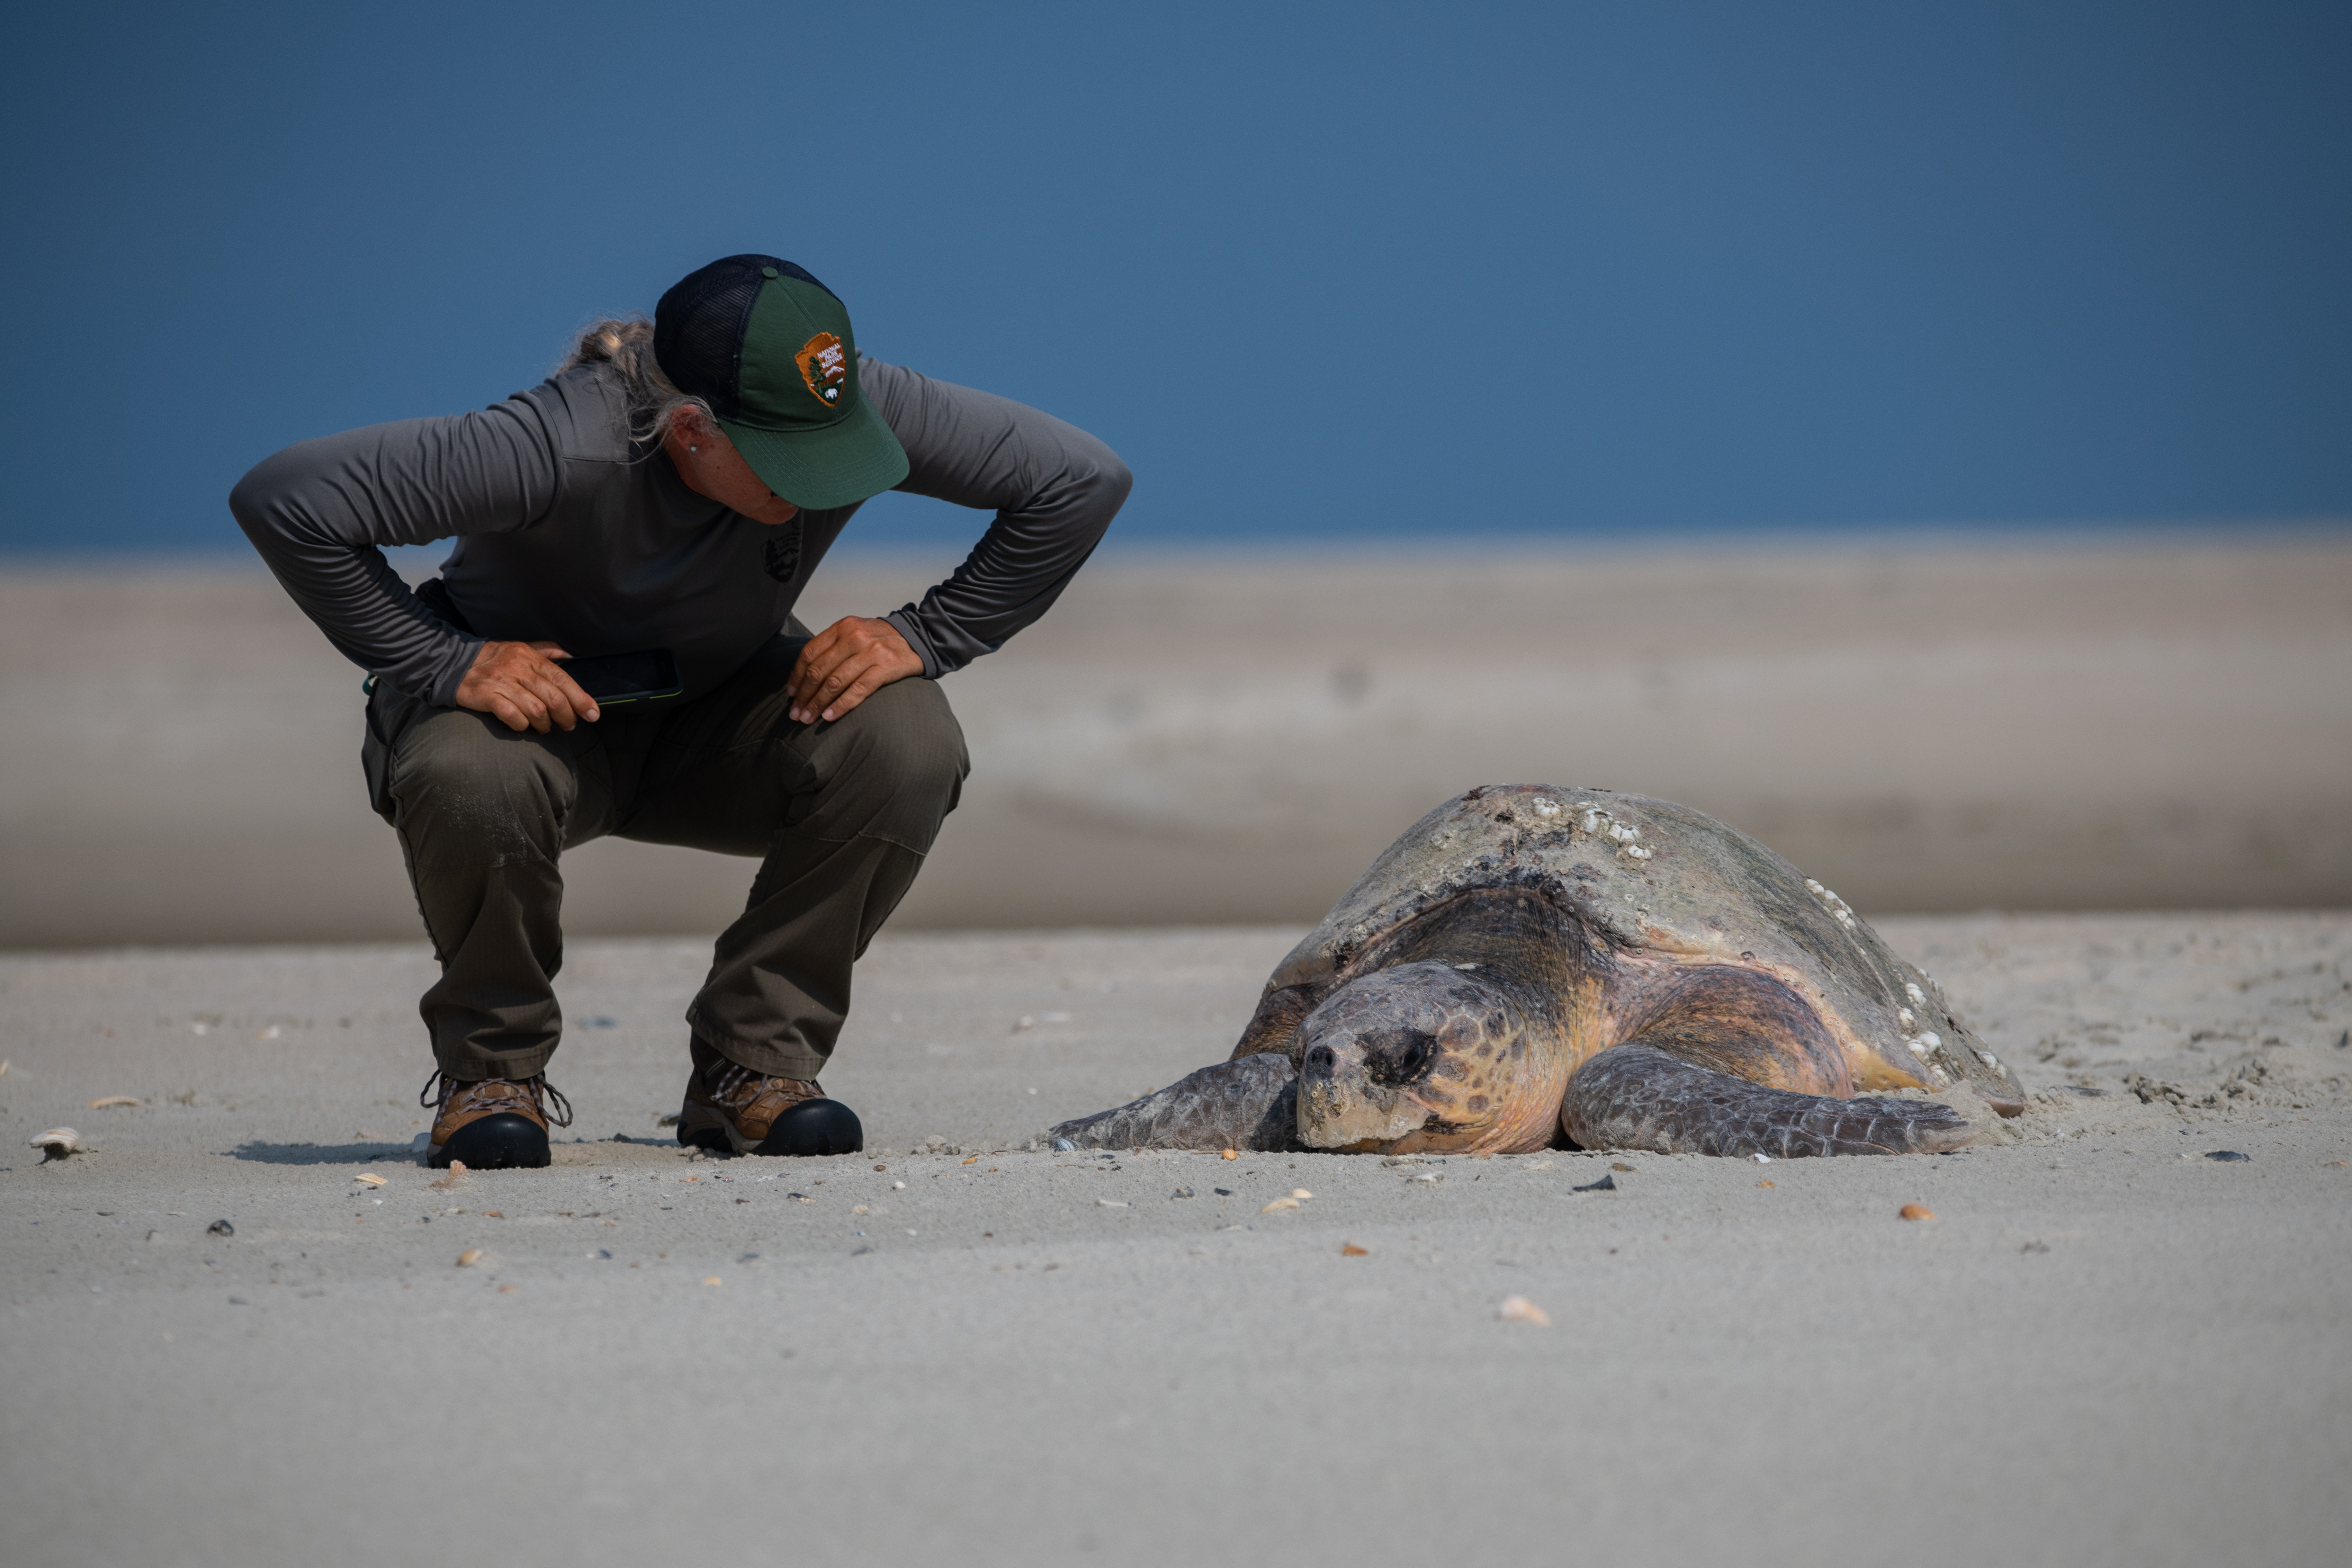 Tourist observing a large sea turtle on the sandy beaches of Cabo Verde, highlighting the island's wildlife and eco-tourism opportunities. Viagens low cost Cabo Verde.